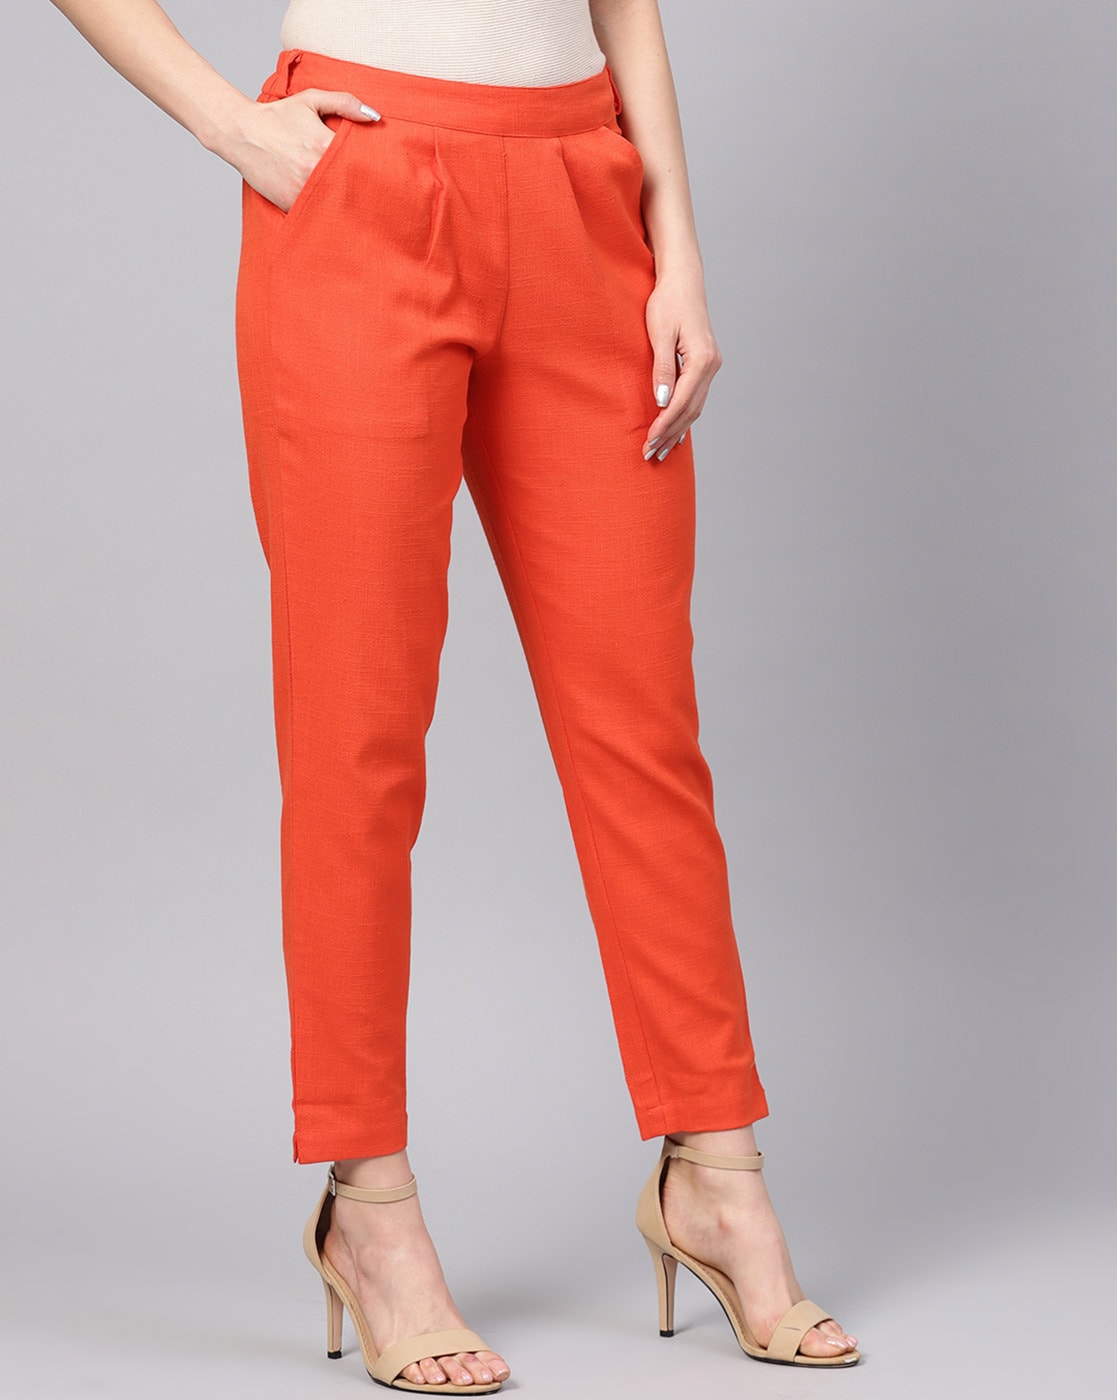 Resellers Avaasa kurtis - AVAASA RAYON SLIM FIT ANKLE LENGTH RELAXED PANTS  . D. No. 0920 𝑴𝑹𝑷 -599 𝒆𝒙𝒄𝒍𝒖𝒔𝒊𝒗𝒆 𝒄𝒐𝒍𝒍𝒆𝒄𝒕𝒊𝒐𝒏 𝒋𝒖𝒔𝒕  ₹ 220+ 𝒔𝒉𝒊𝒑𝒑𝒊𝒏𝒈. ( SIZE--- S, M, L, XL, XXL) 🌟Limited